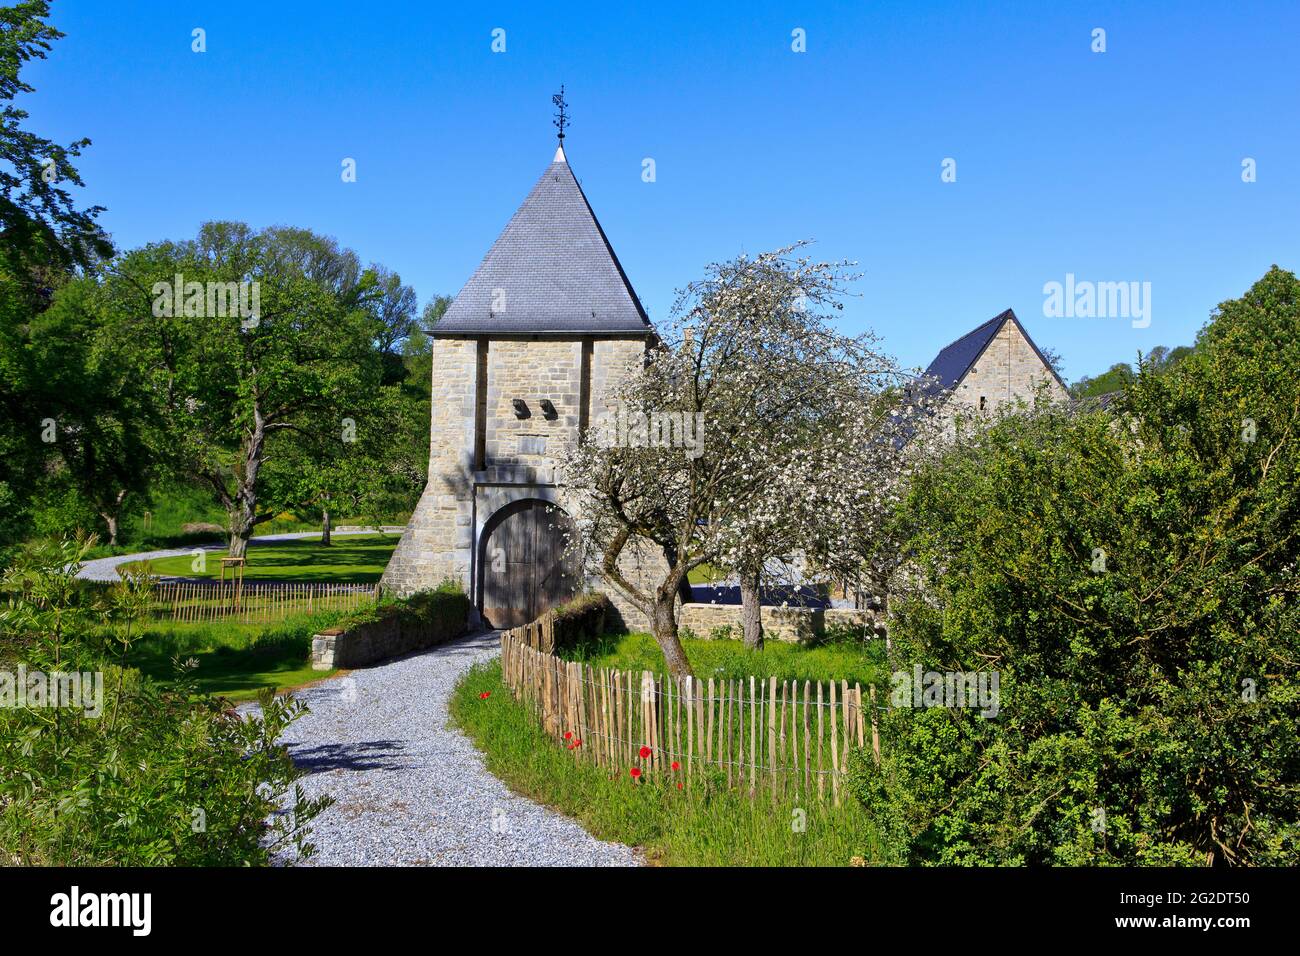 Main entrance to the picturesque 13th century Crupet Castle in Assesse (Namur province), Belgium Stock Photo